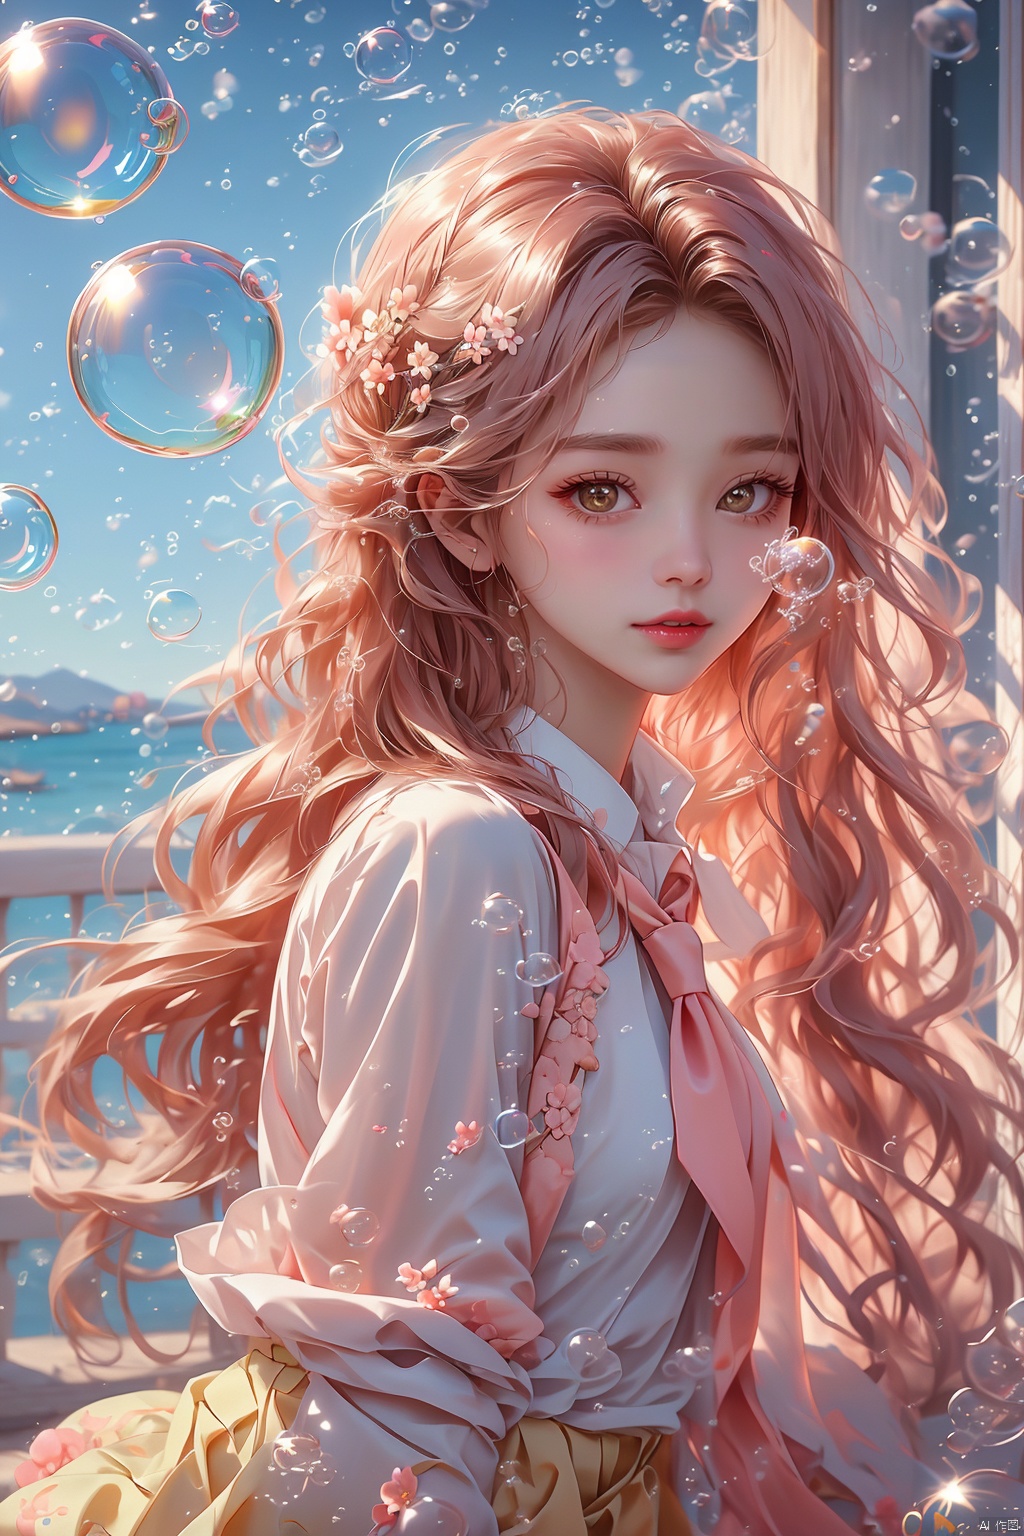  (bubble:1.5),masterpiece,1 Girl,18 years old,Stand,Look at me,Lovely,Sweet,Wearing a school uniform,Students,Tie,Miniskirt,Outdoors,Aisle,Spring,Peach blossom,Flying petals,Long hair,textured skin,super detail,best quality, (\meng ze\)